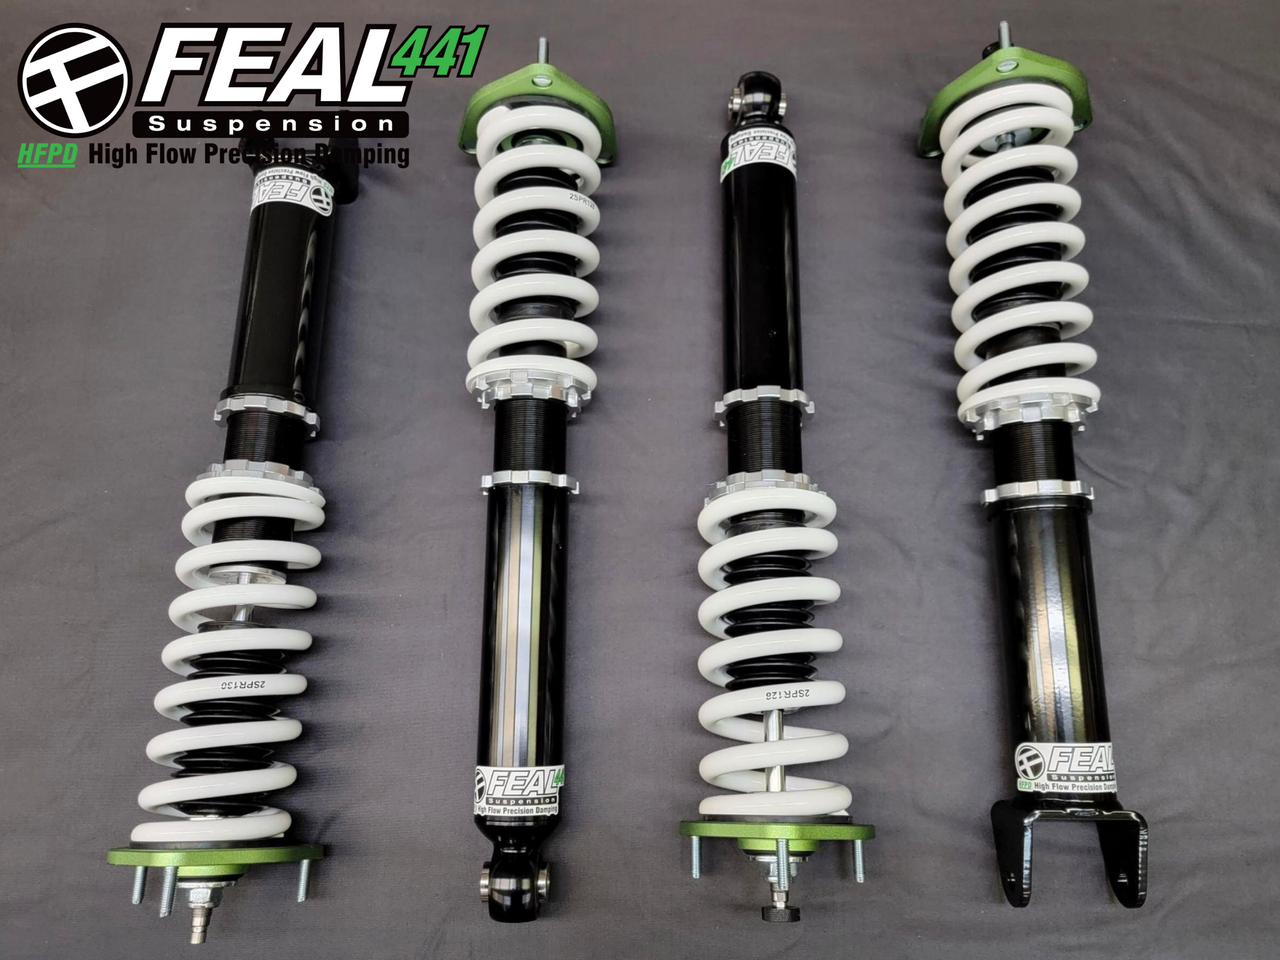 Feal Suspension 441 Coilovers - 2013+ Infiniti Q50 (AWD/RWD)